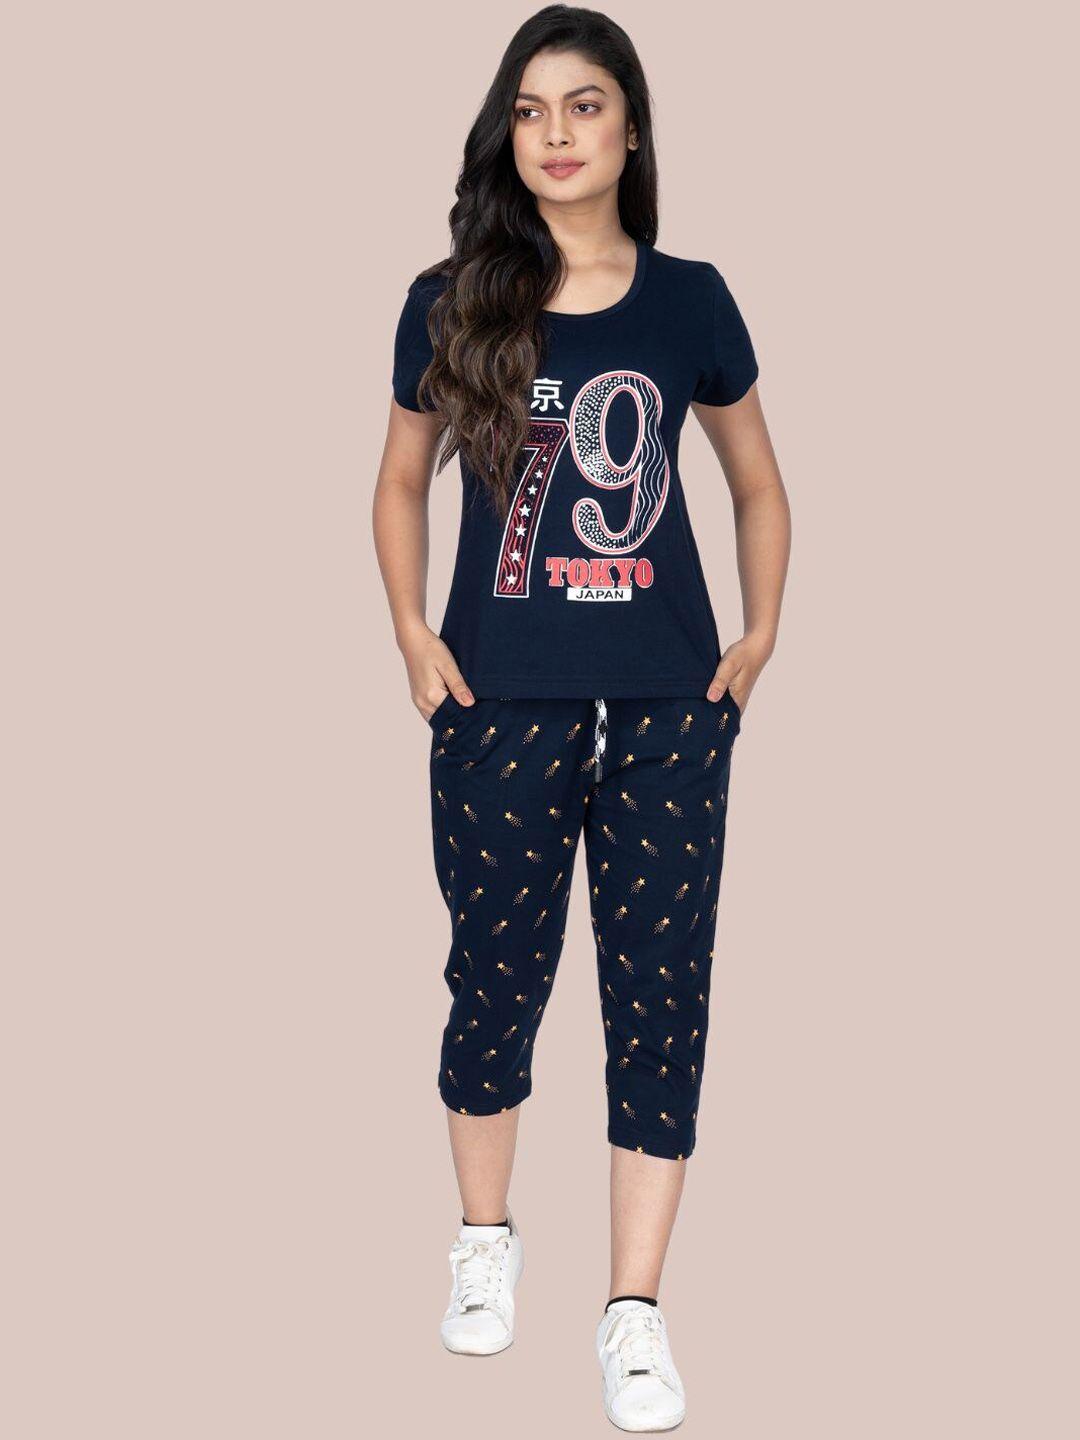 styleaone women printed pure cotton co-ords